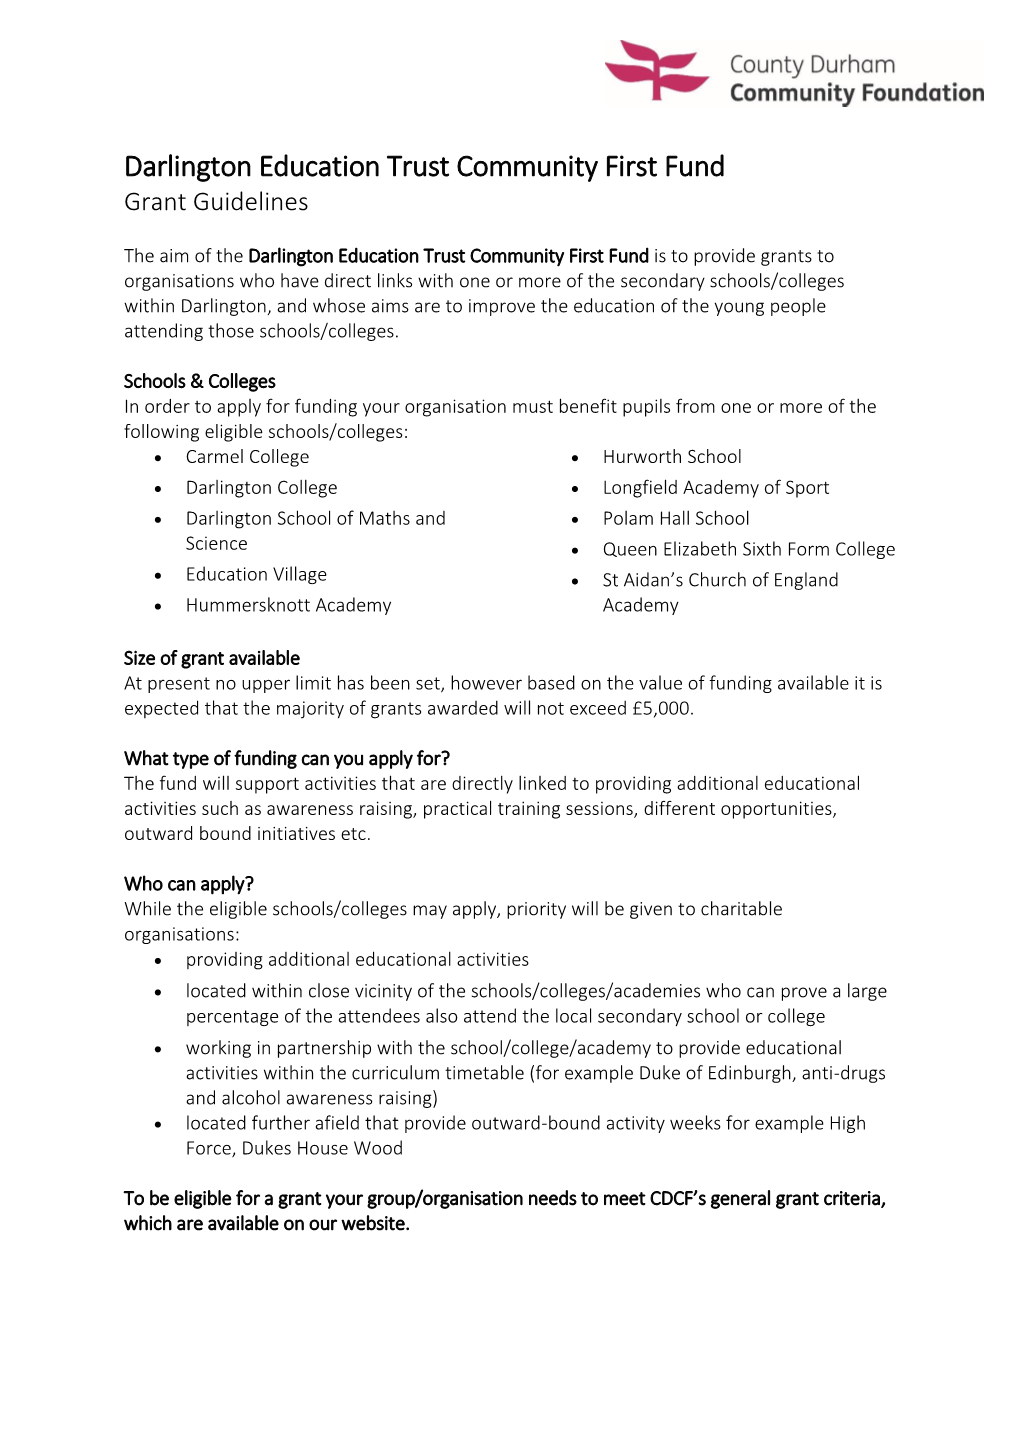 Darlington Education Trust Community First Fund Grant Guidelines